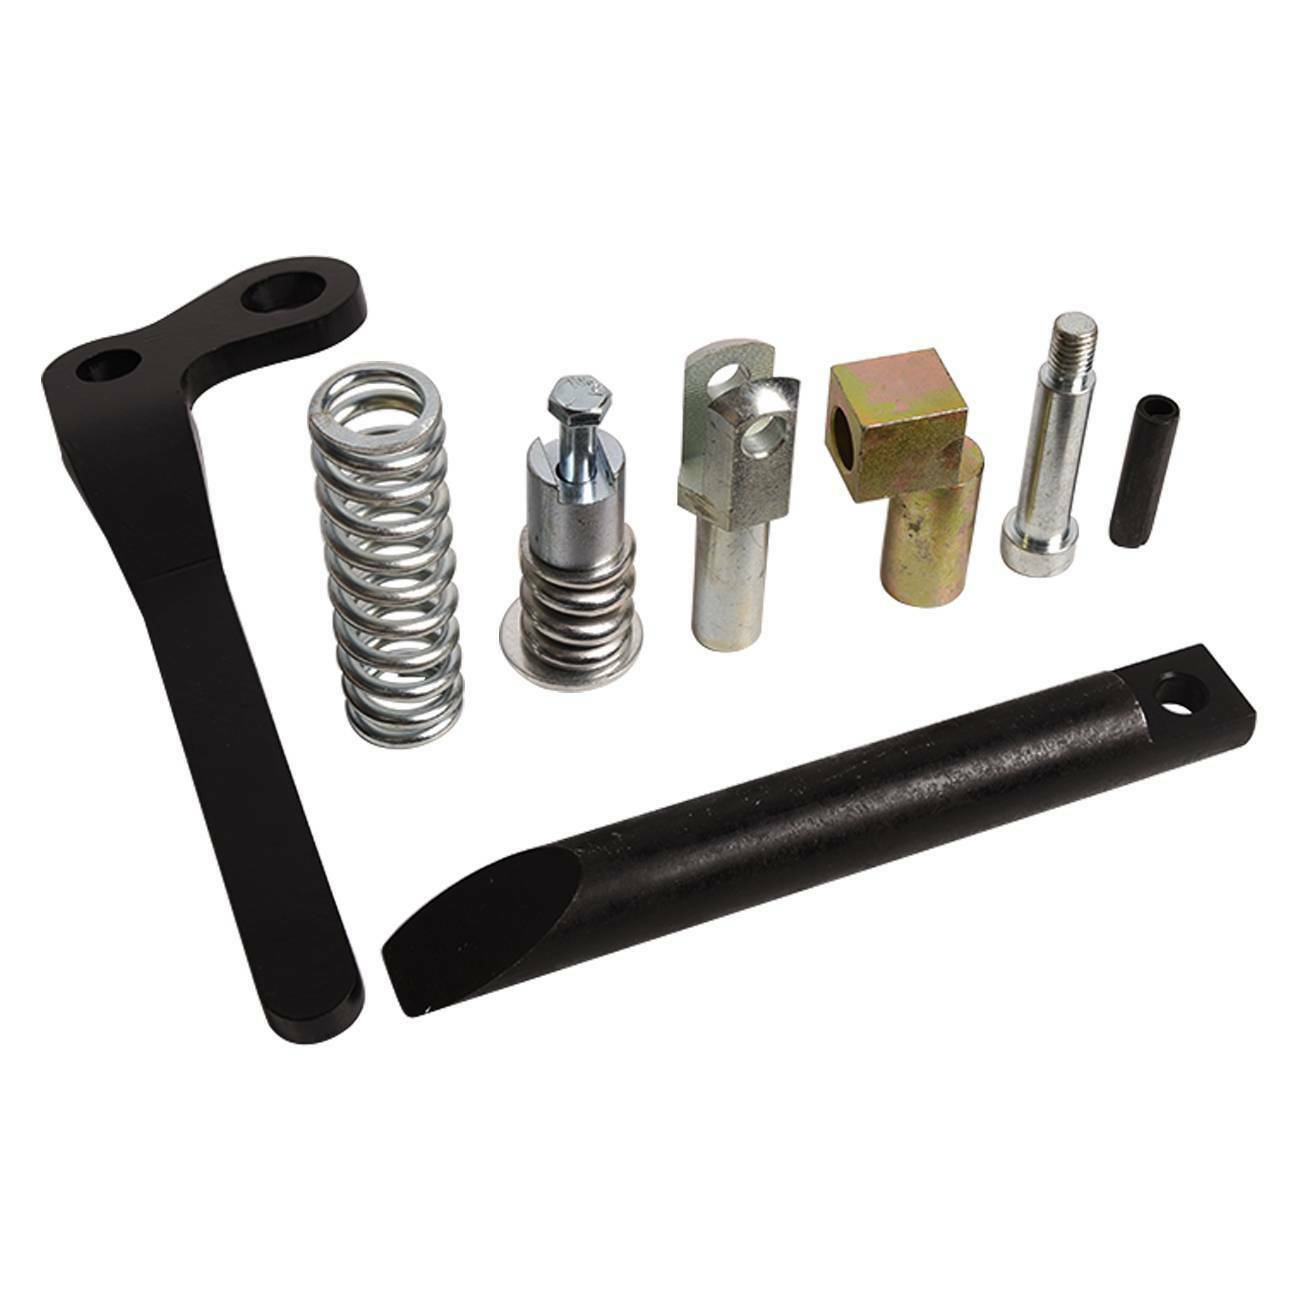 Tach Lever Kit RHS Lever Latch for Bobcat 630 631 632 641 642 643 645 653 730